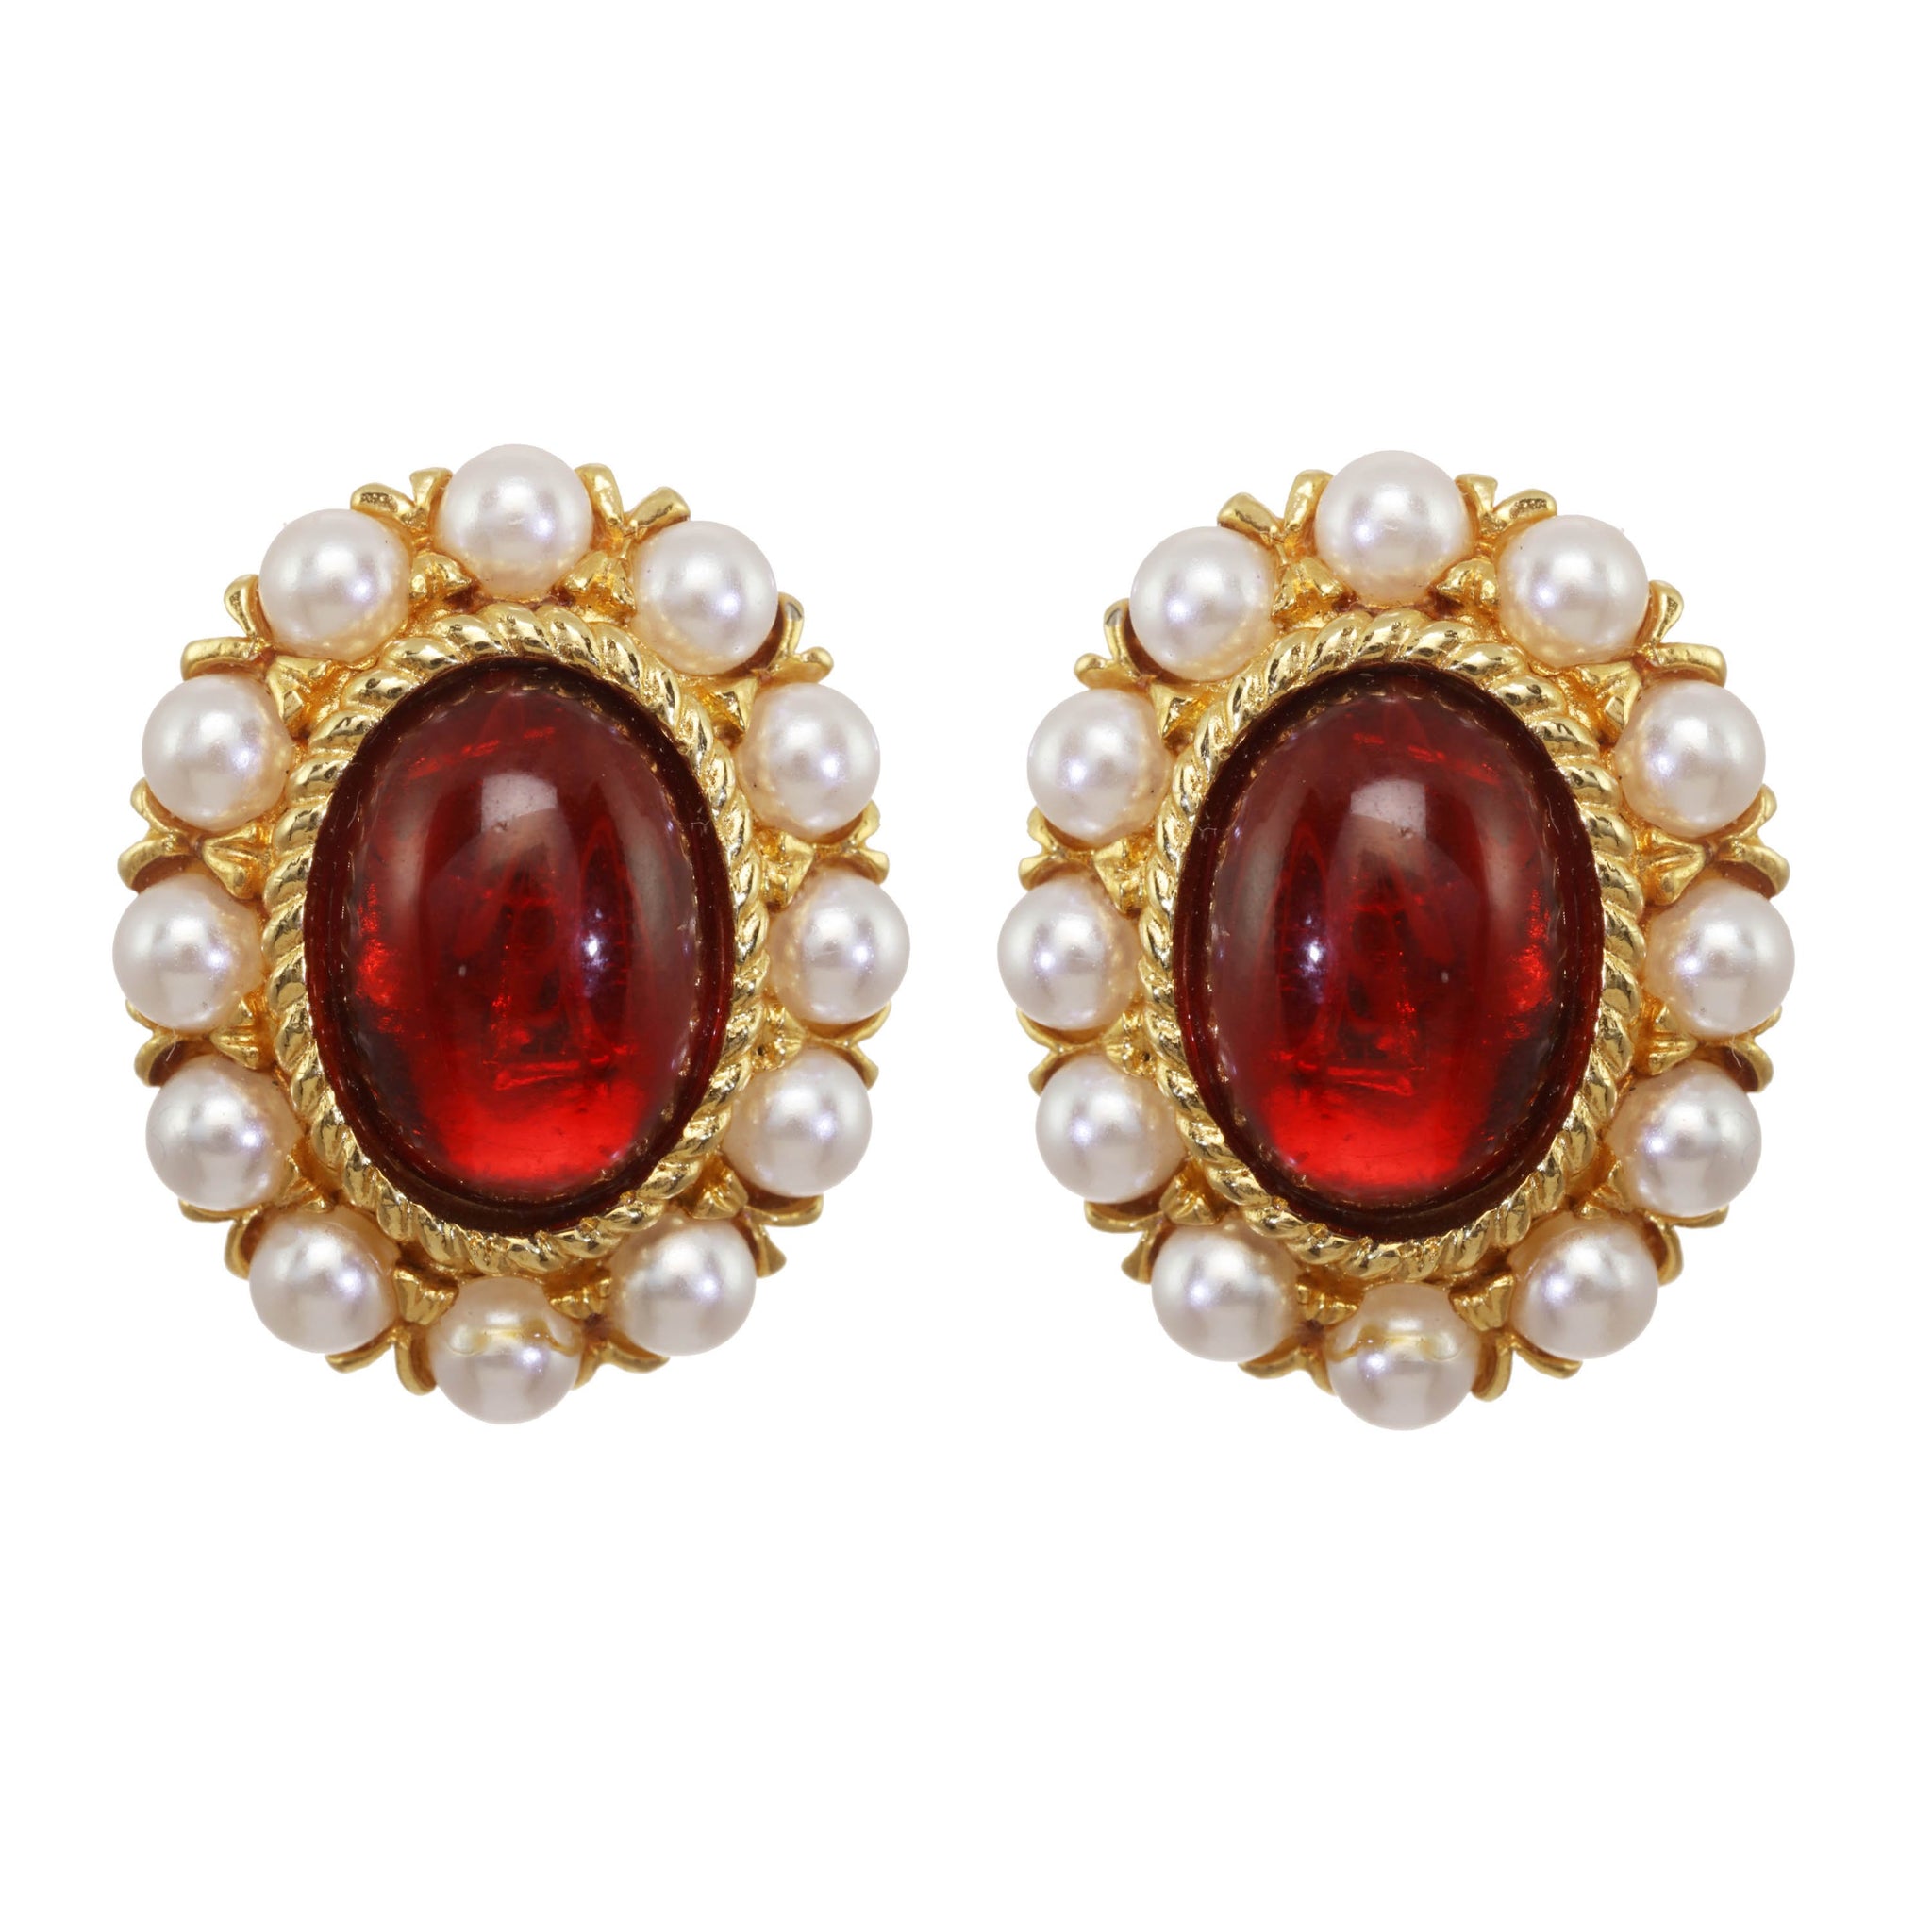 Buy The Red Tassel Earrings with Gold Oval and Crystal | JaeBee